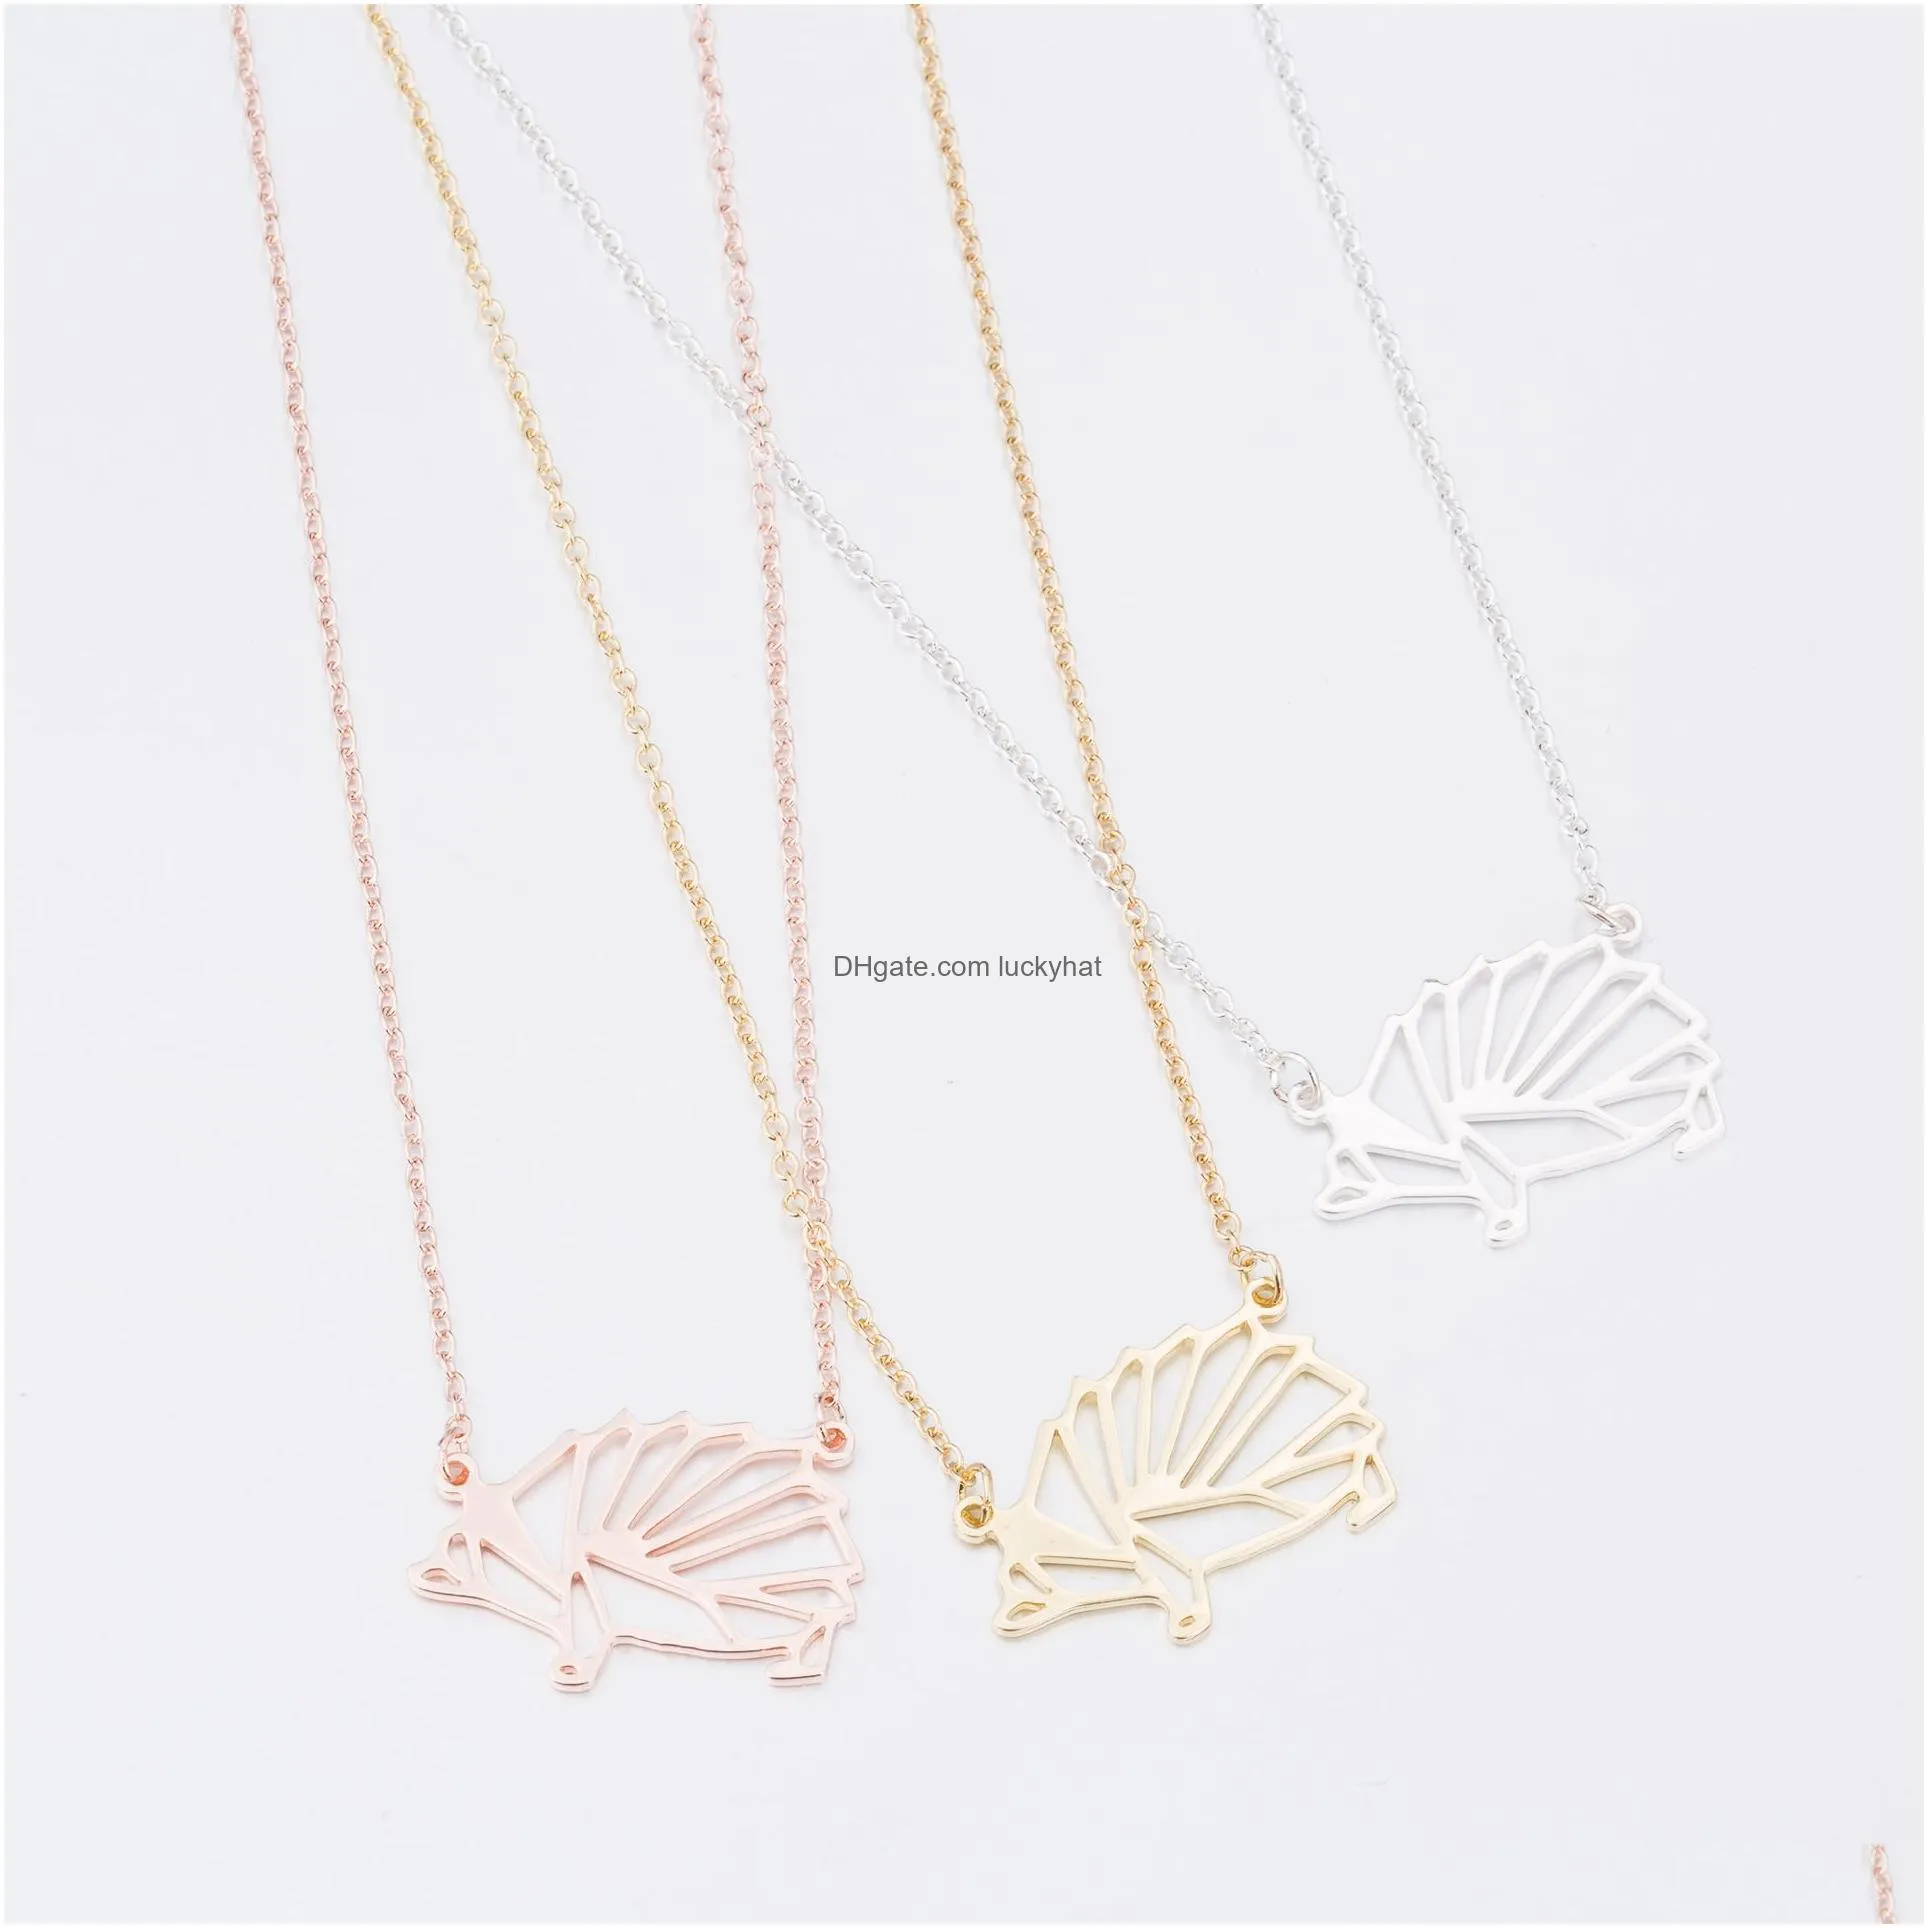 Pendant Necklaces Origami Animal Pendant Necklace For Men Women Stainless Steel Jewelry Cute Hedgehog Geometric Necklaces Choker Drop Dhmh5